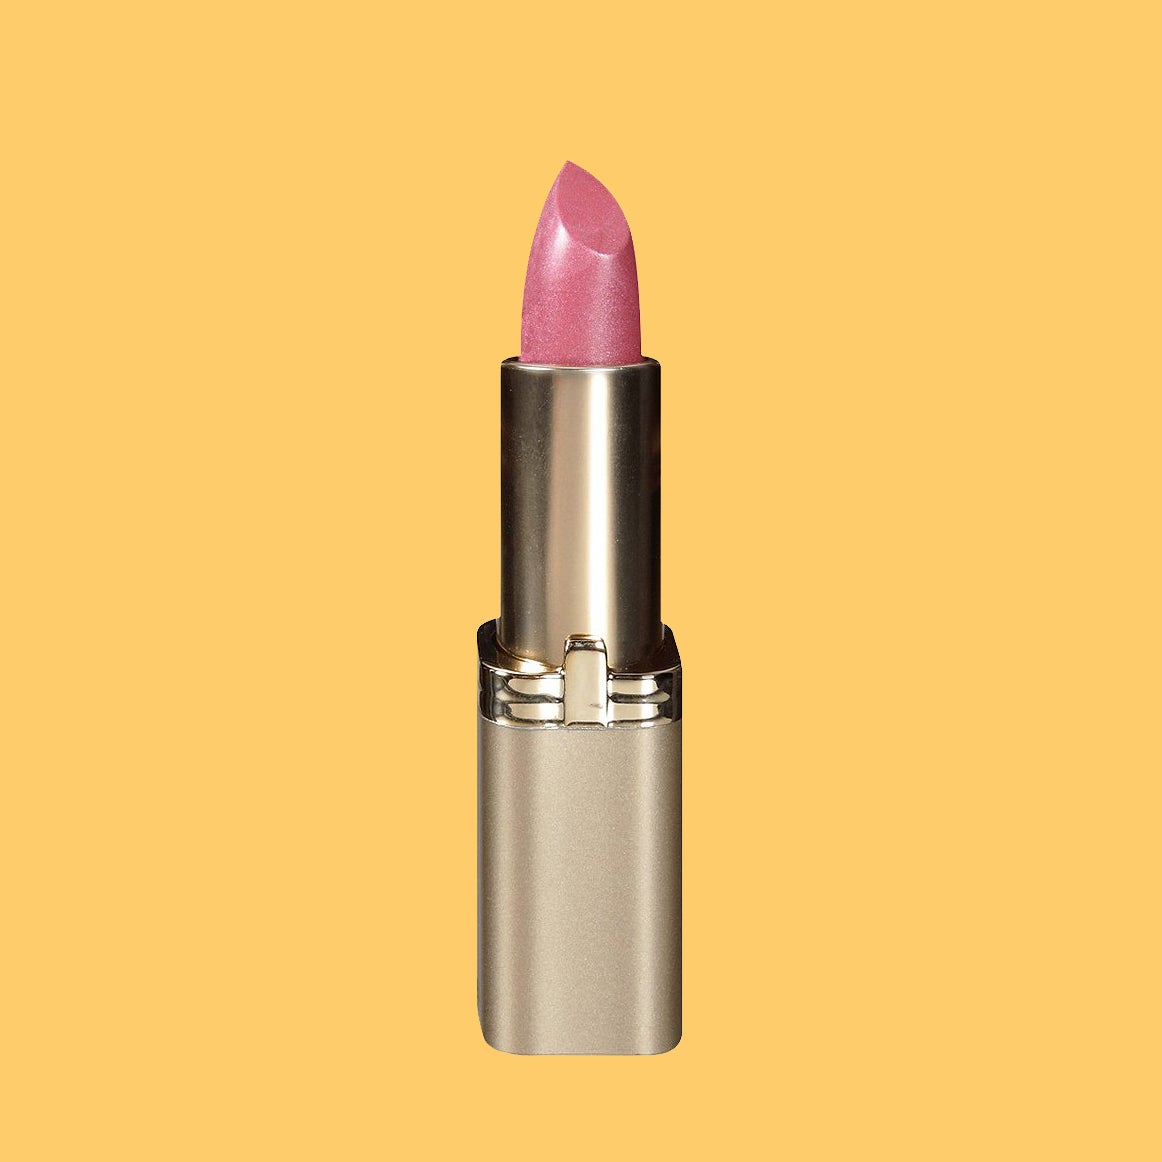 These 13 Stunning Pink And Red Lipsticks Are Perfect For Valentine's Day
